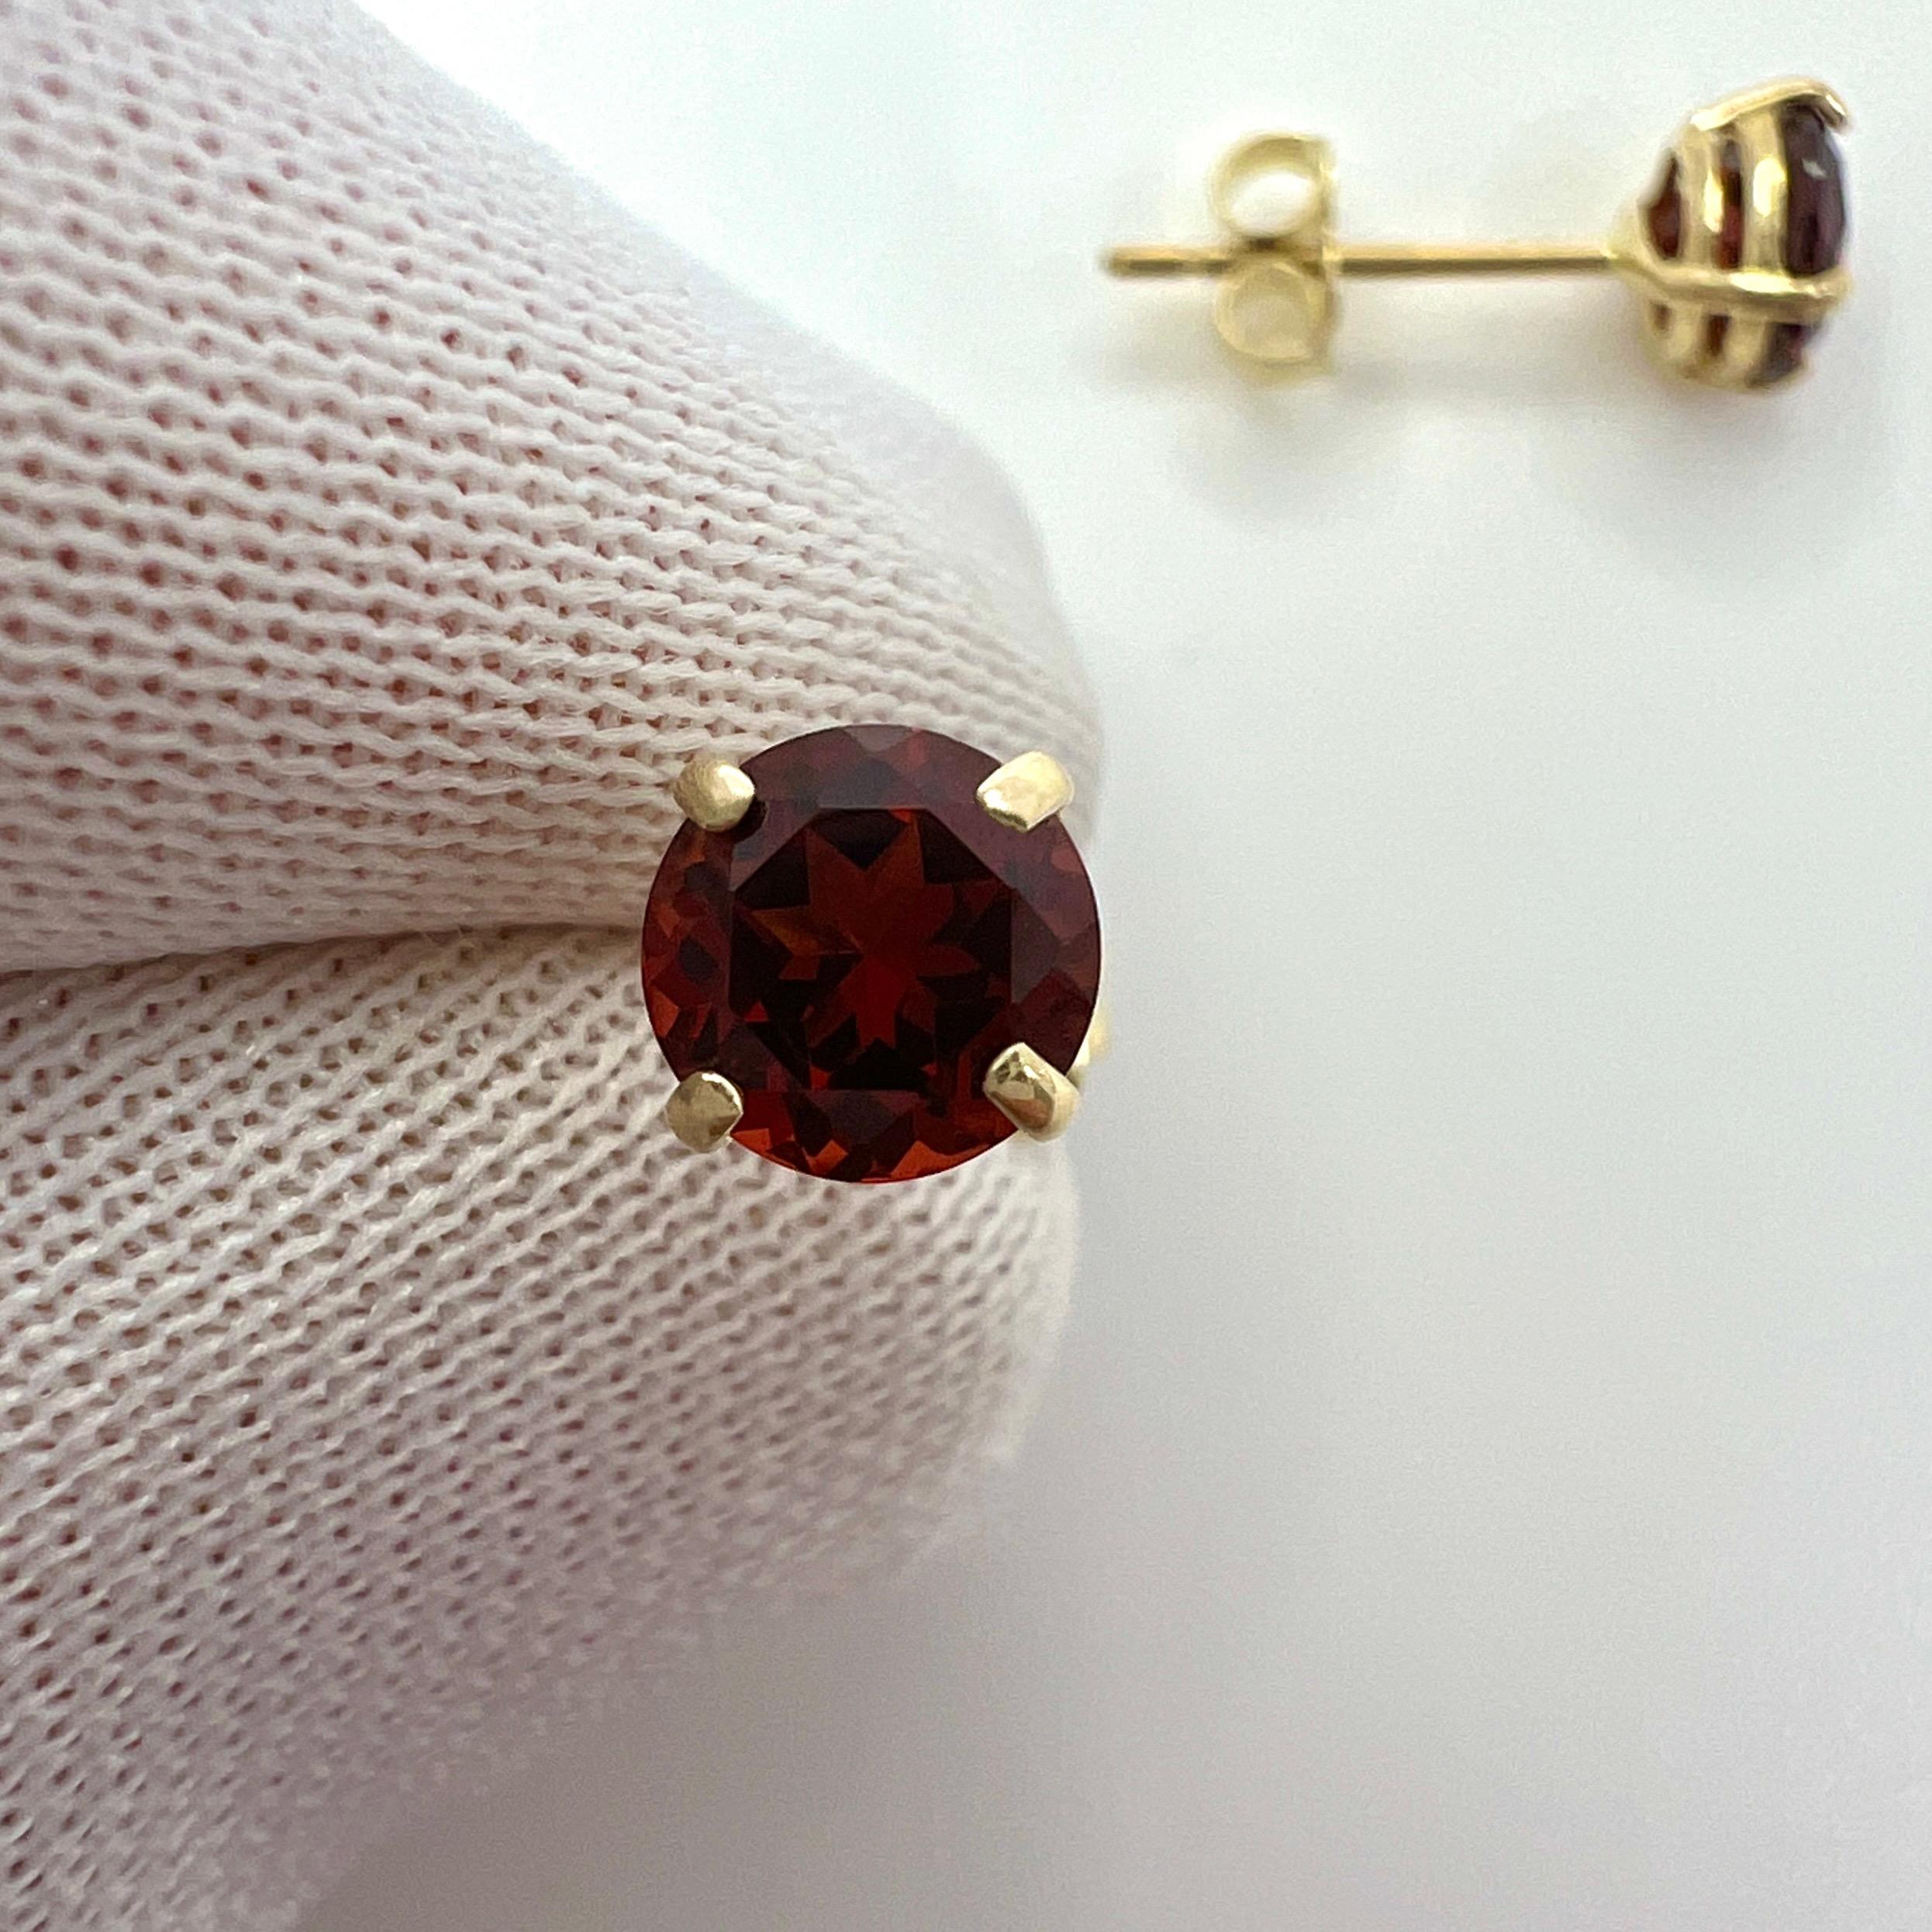 Vivid Red 1.20 Carat Almandine Rhodolite Garnet 9k Yellow Gold Earring Studs.

Beautiful 5mm matching pair of round garnets with vivid red colour, excellent clarity and an excellent round brilliant cut.

The gemstones may vary slightly from the